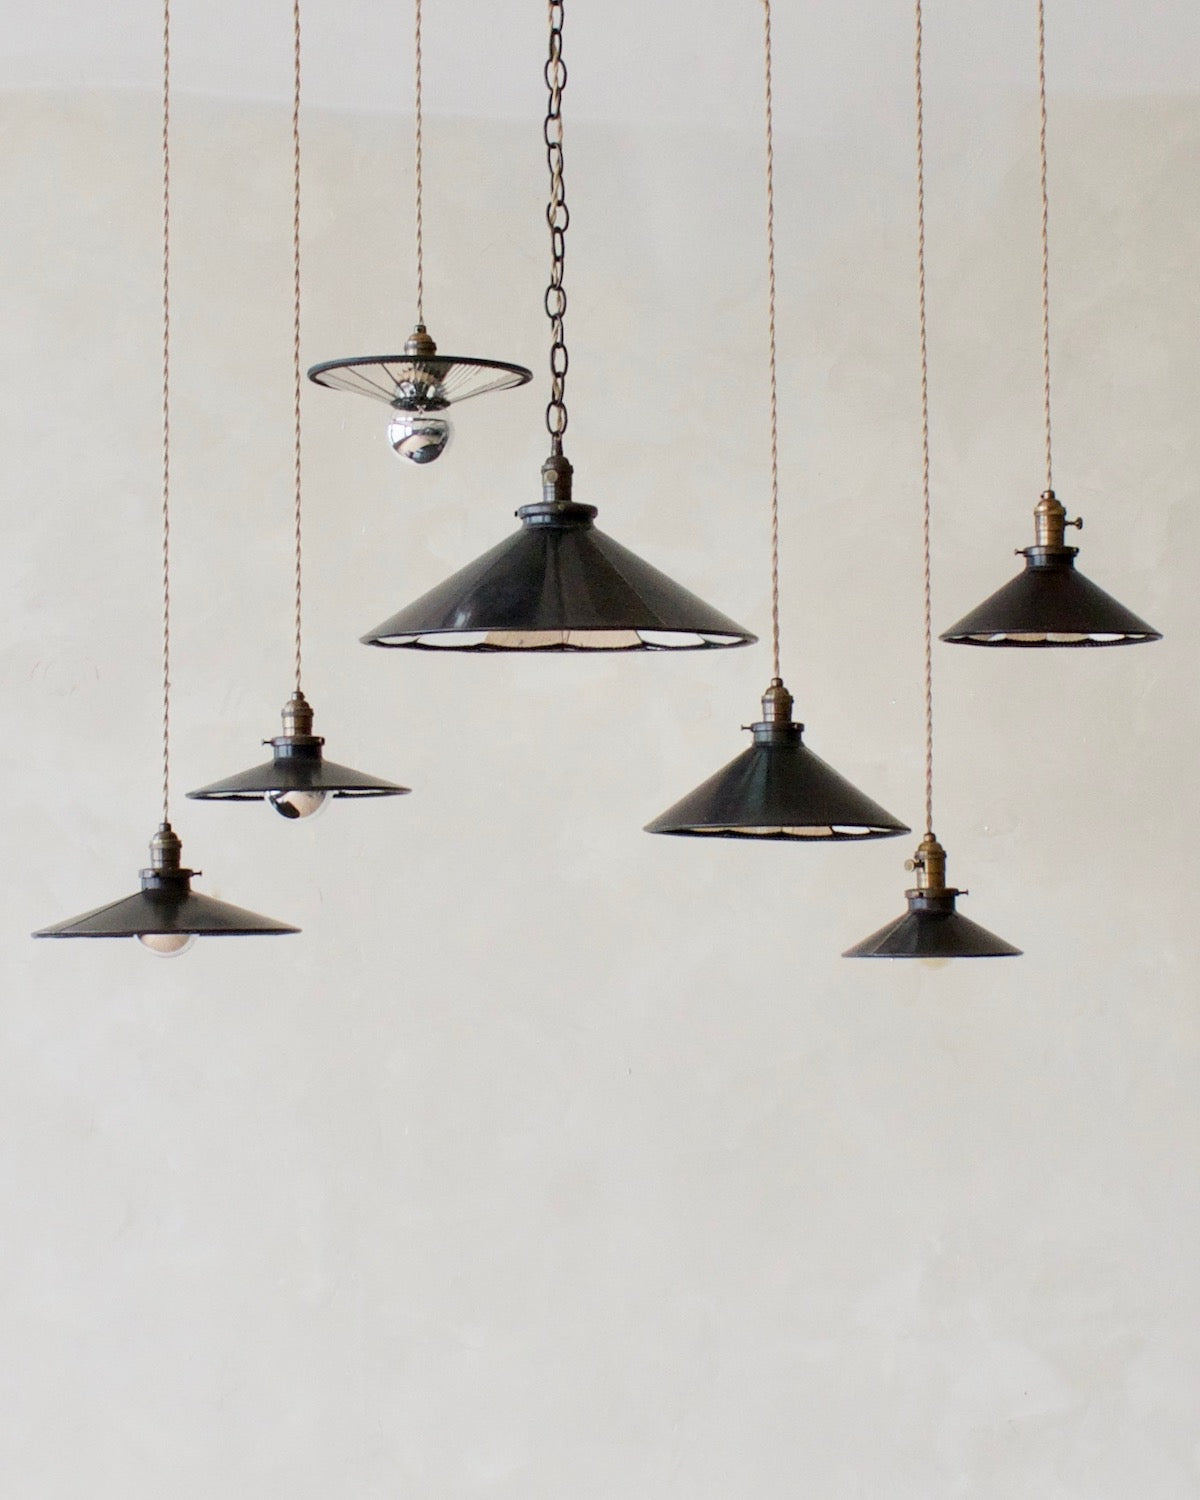 Modern mirrored cone pendants with oil rubbed brass. Hardwired light fixture. Simple interior design, made in the USA.